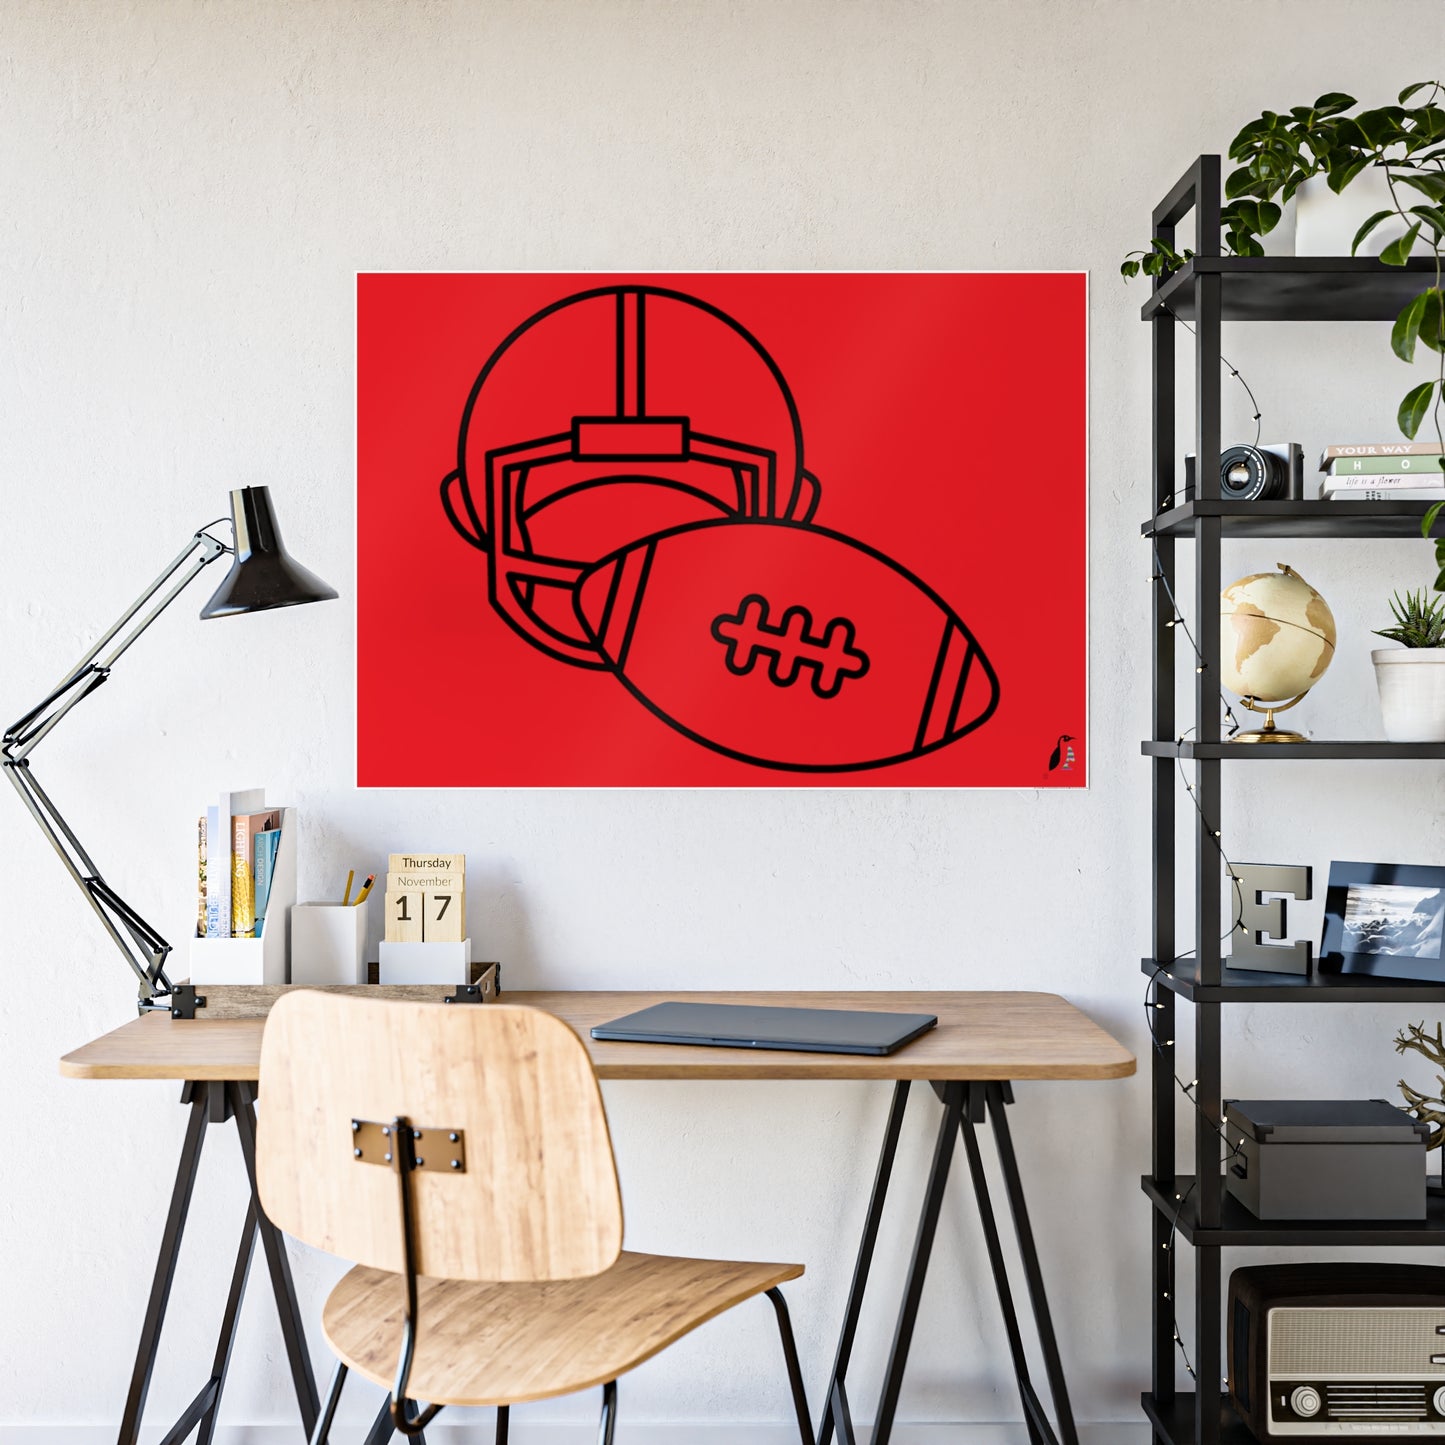 Gloss Posters: Football Red